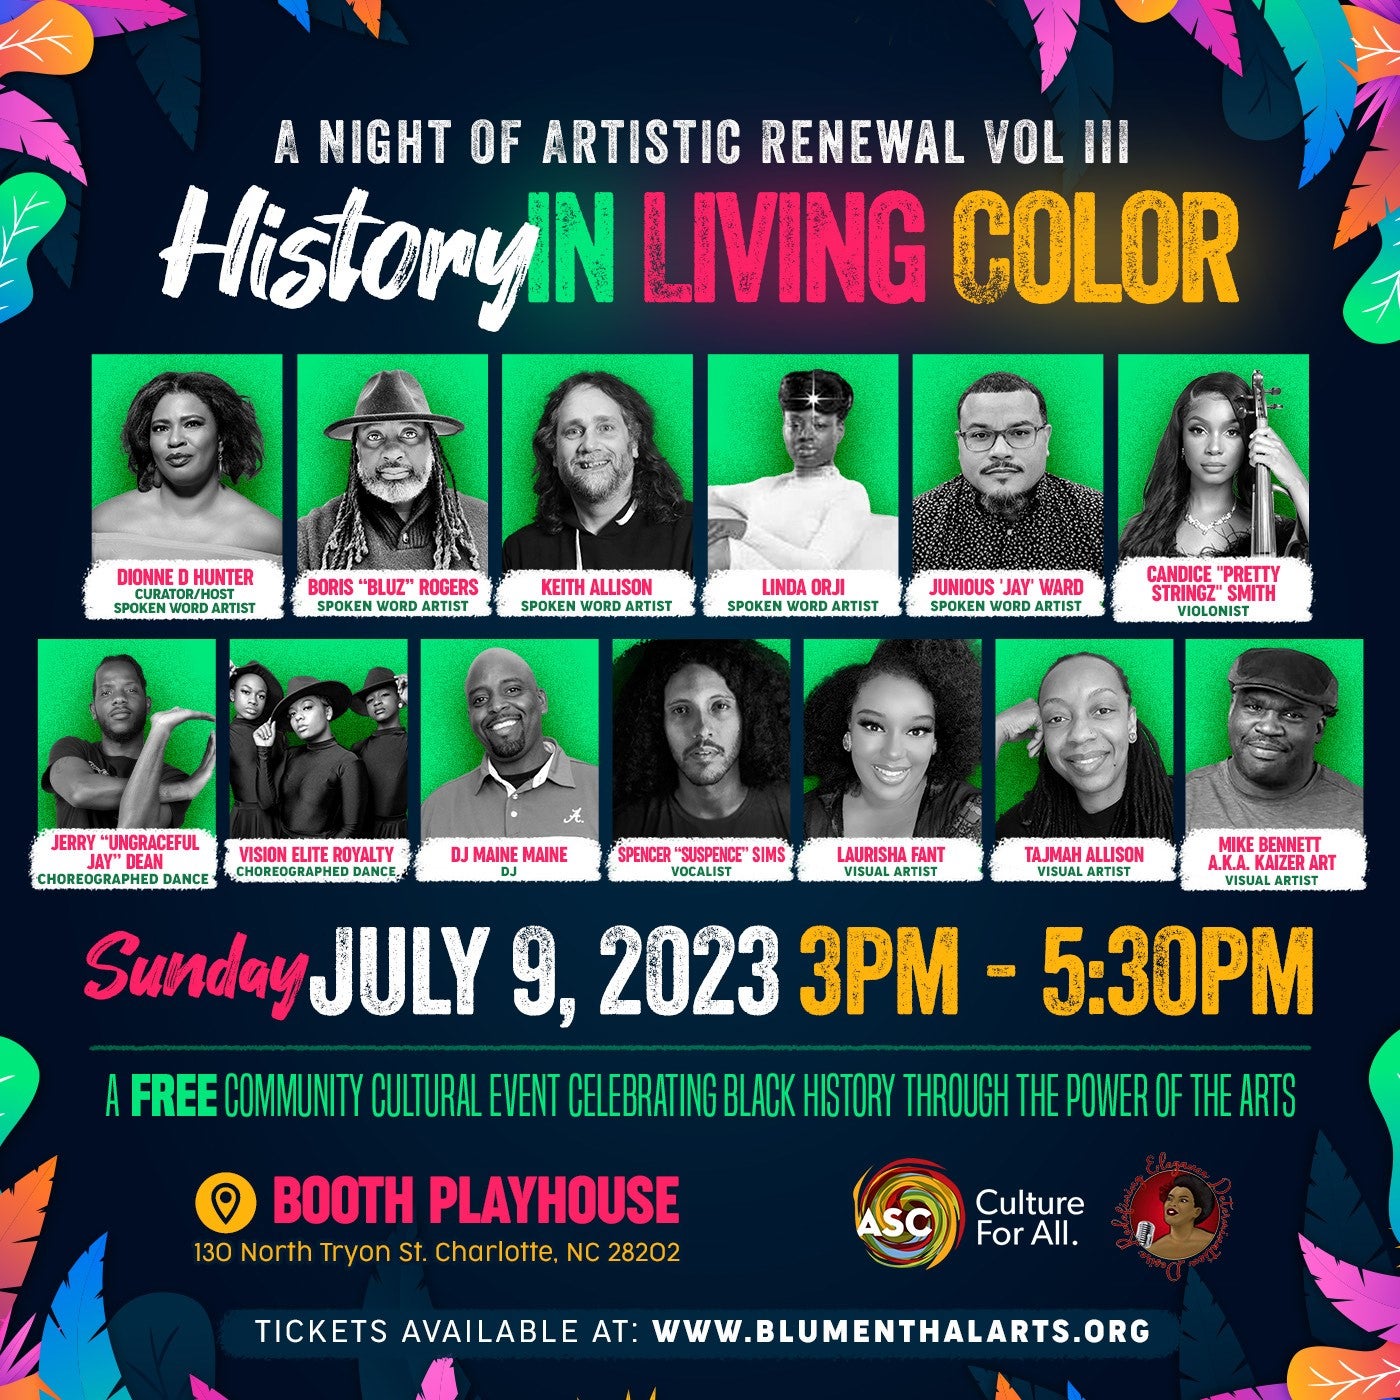 A Night of Artistic Renewal Vol. III - History in Living Color